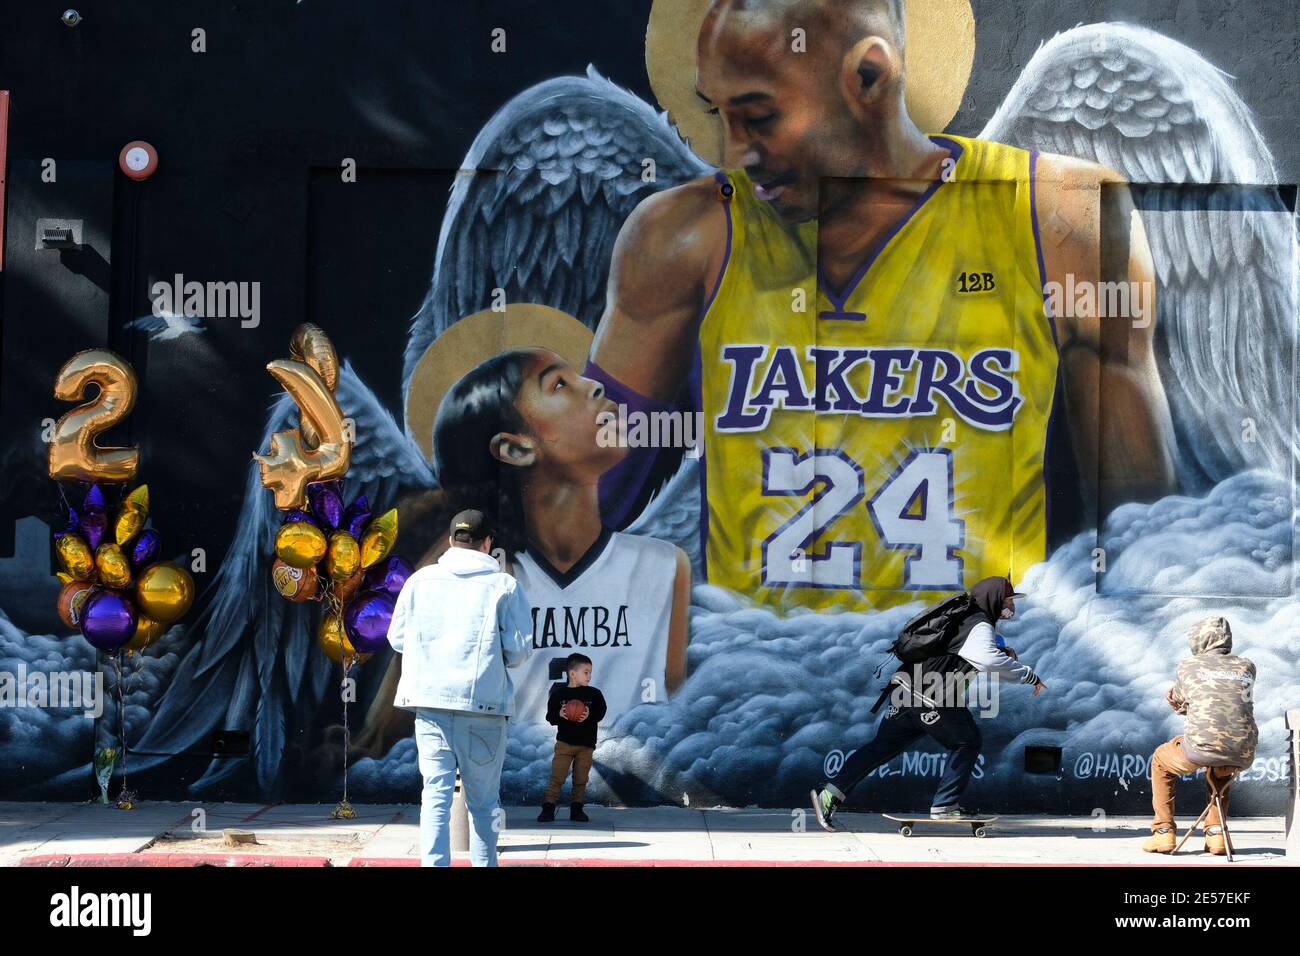 Los Angeles, California, USA. 26th Jan, 2021. A man and a kid take pictures in front of a mural honoring NBA star Kobe Bryant and his daughter Gigi near Staples Center in downtown Los Angeles. Tuesday is the first anniversary of the death of NBA legend Bryant and his daughter. Credit: Ringo Chiu/ZUMA Wire/Alamy Live News Stock Photo